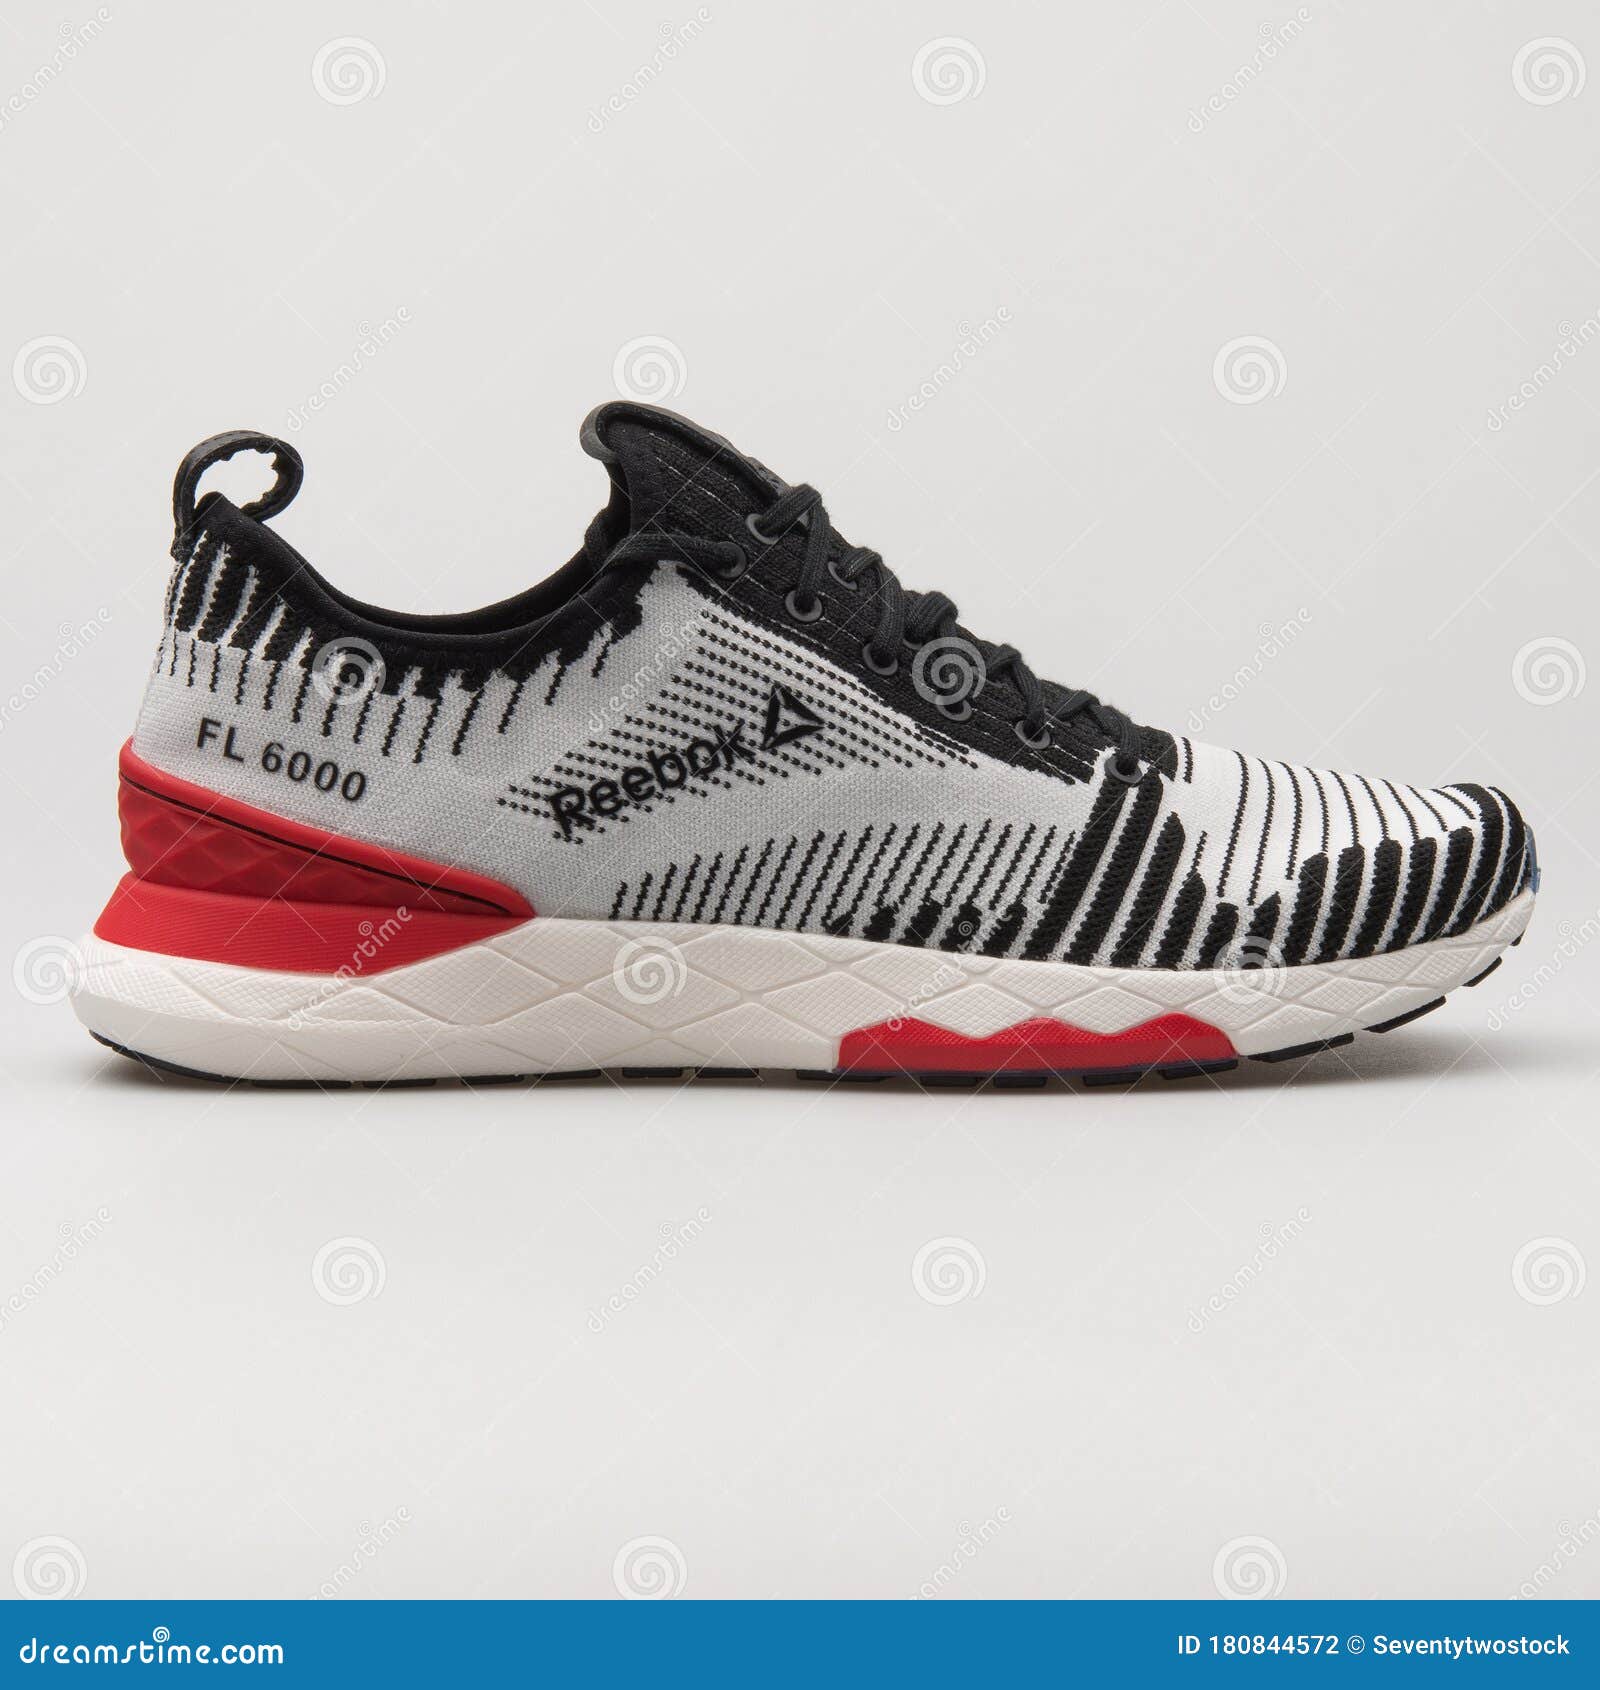 Reebok Floatride 6000 Black, Grey, Red and White Sneaker Editorial Photography - Image of background, 180844572